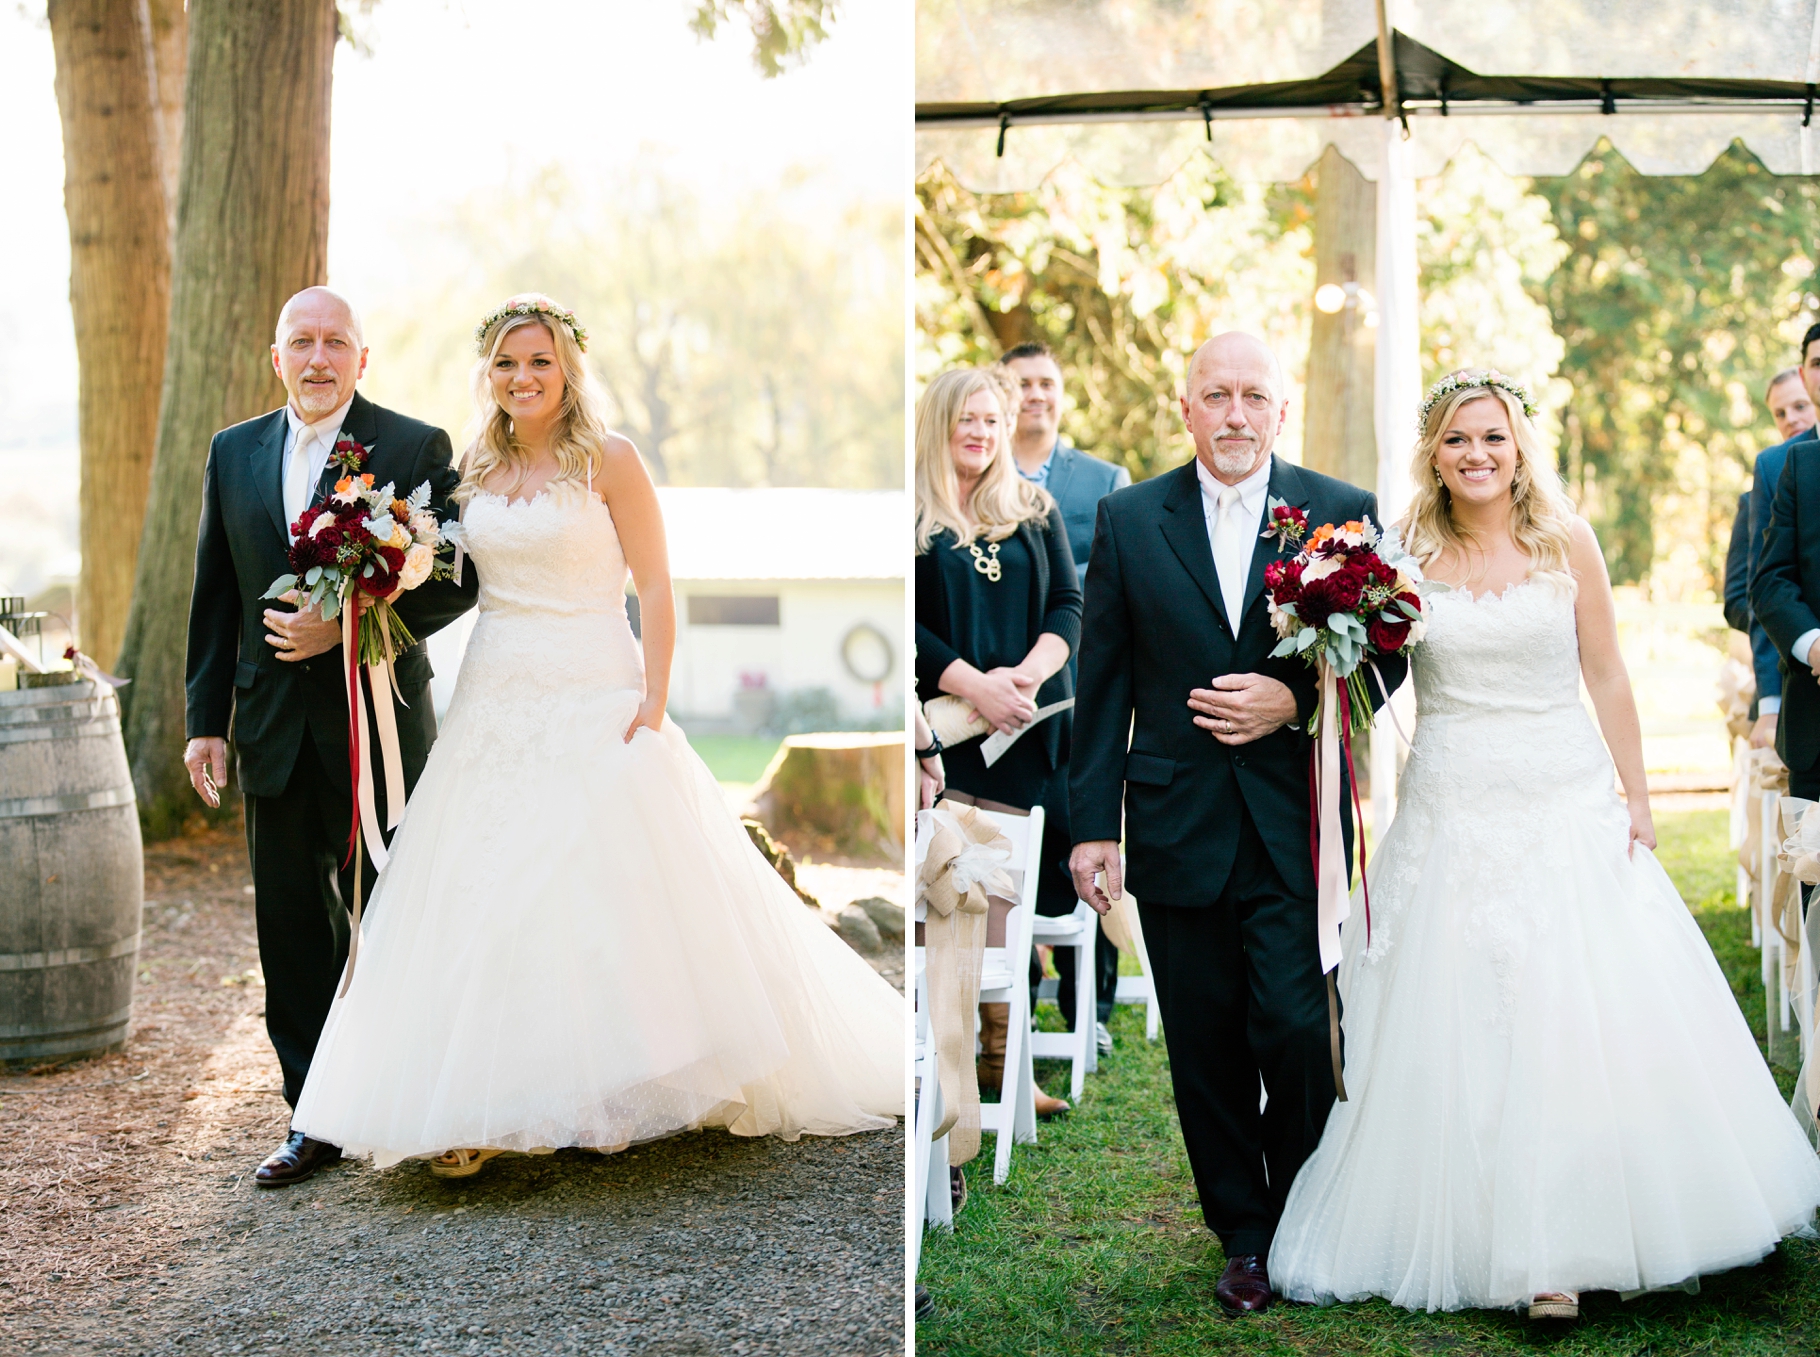 25-Ceremony-Bride-Groom-Delille-Cellars-Chateau-Vineyard-Woodinville-Wedding-Photographer-Photography-by-Betty-Elaine